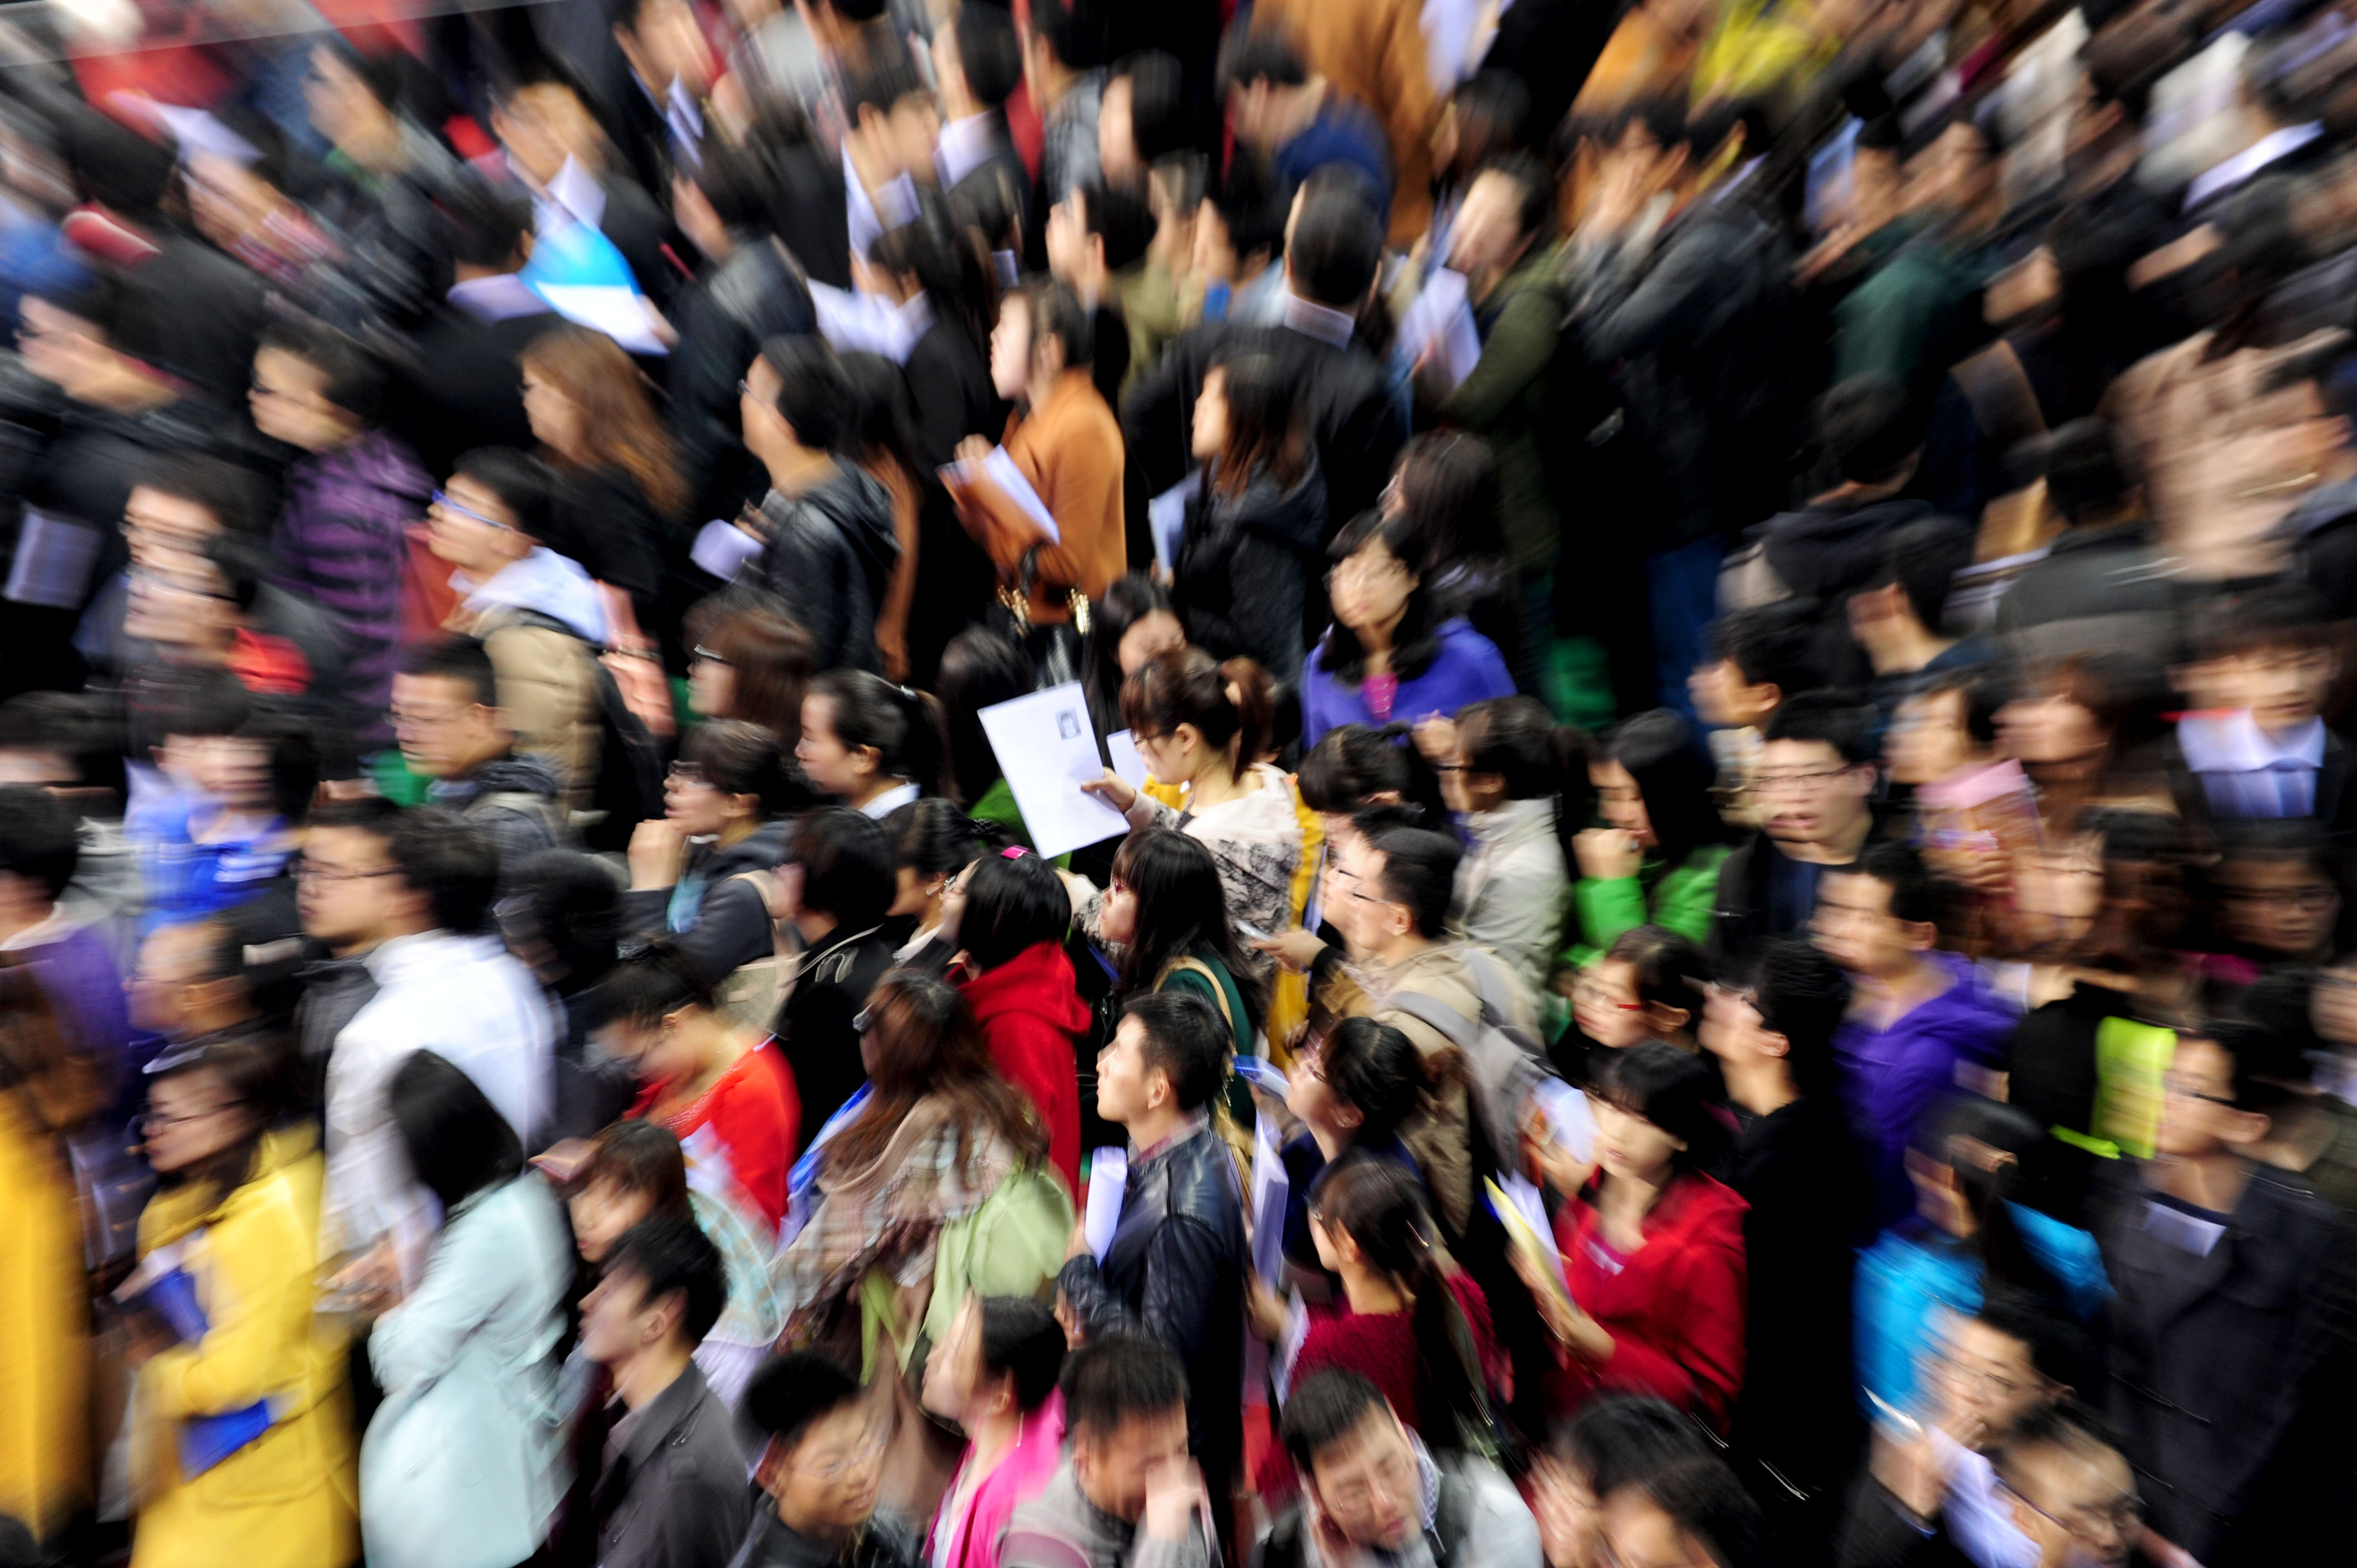 (140325) -- SHENYANG, March 25, 2014 (Xinhua) -- Students swarm into the spring job fair for 2014 graduates at Northeastern University in Shenyang, capital of northeast China's Liaoning Province, March 25, 2014. The spring job fair for 2014 graduates of Northeastern University kicked off on Tuesday, in which over 600 enterprises provide 6,000 jobs for graduates. (Xinhua/Zhang Wenkui) (zgp)